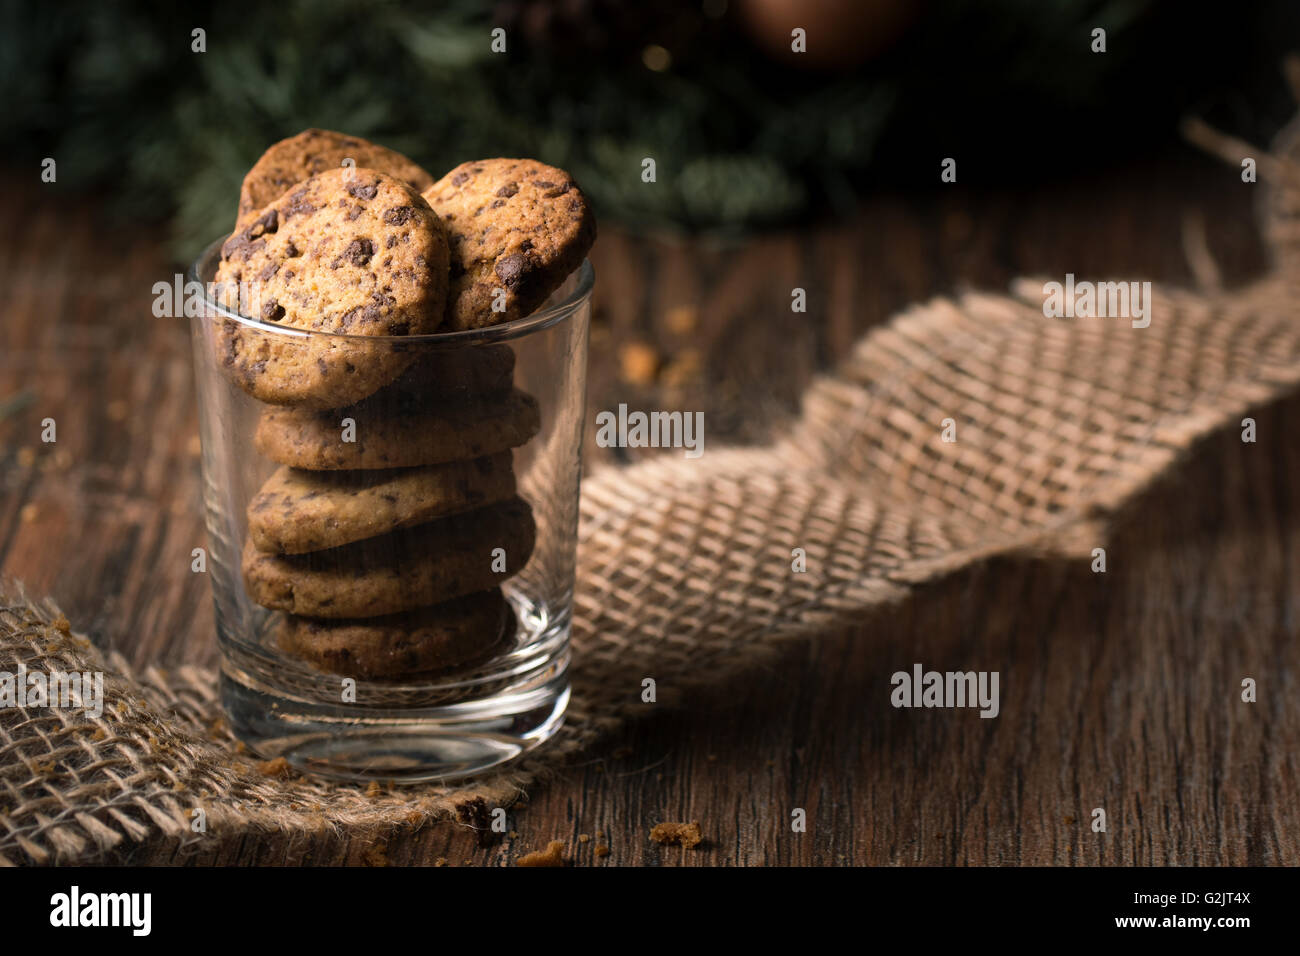 Fresh baked chocolate chip cookies in a glass on a rustic wooden table. Stock Photo